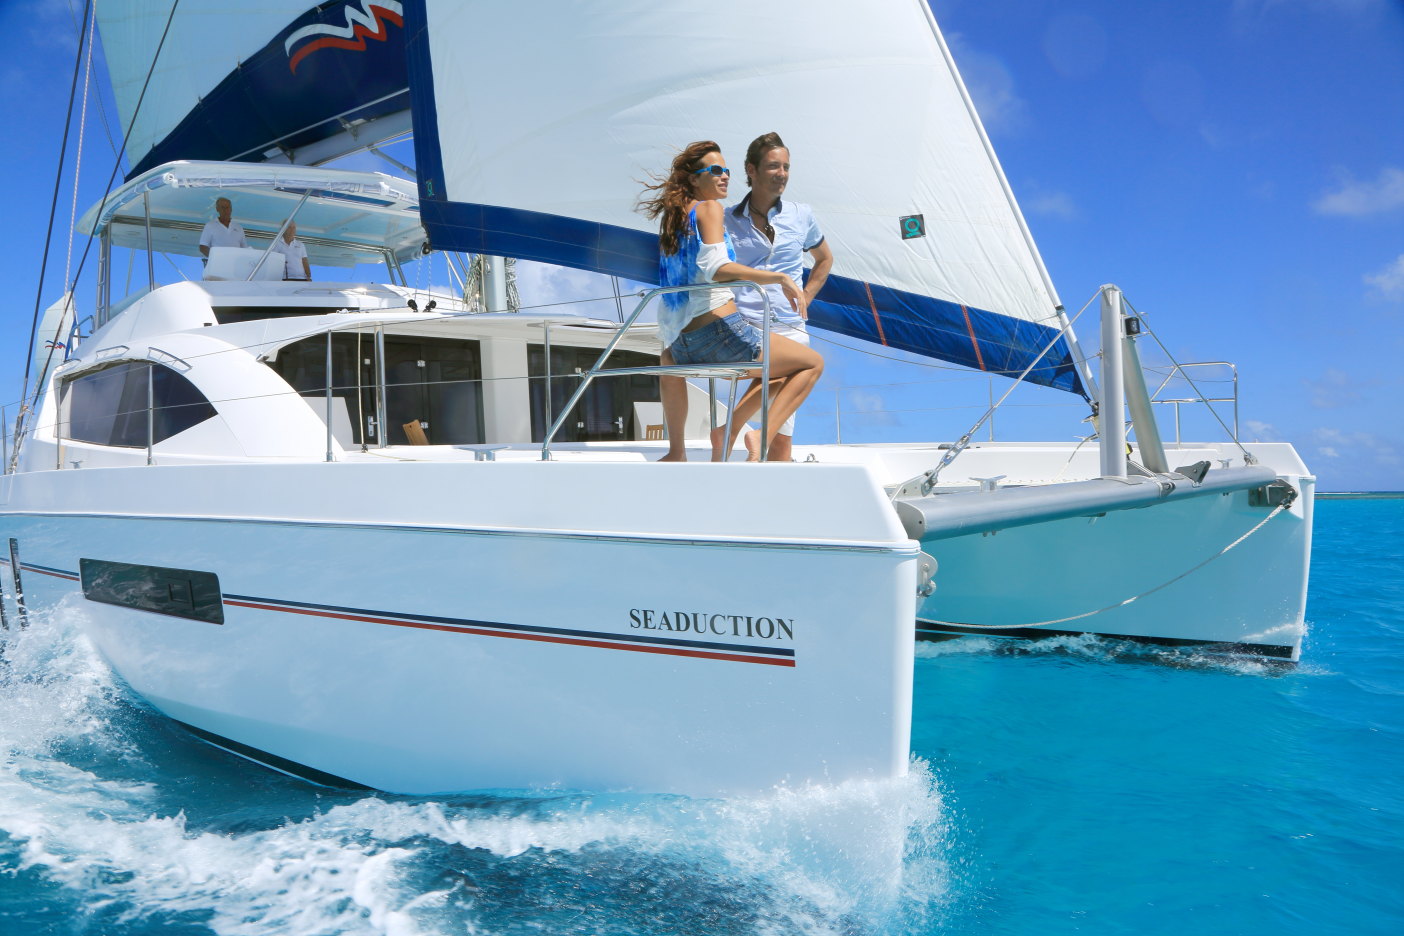 Last Minute yacht charter SPECIAL in BVI!